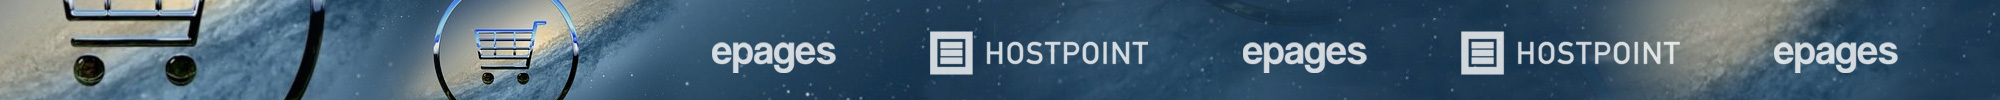 Help and support for optimizing your Hostpoint epages 6 base shop